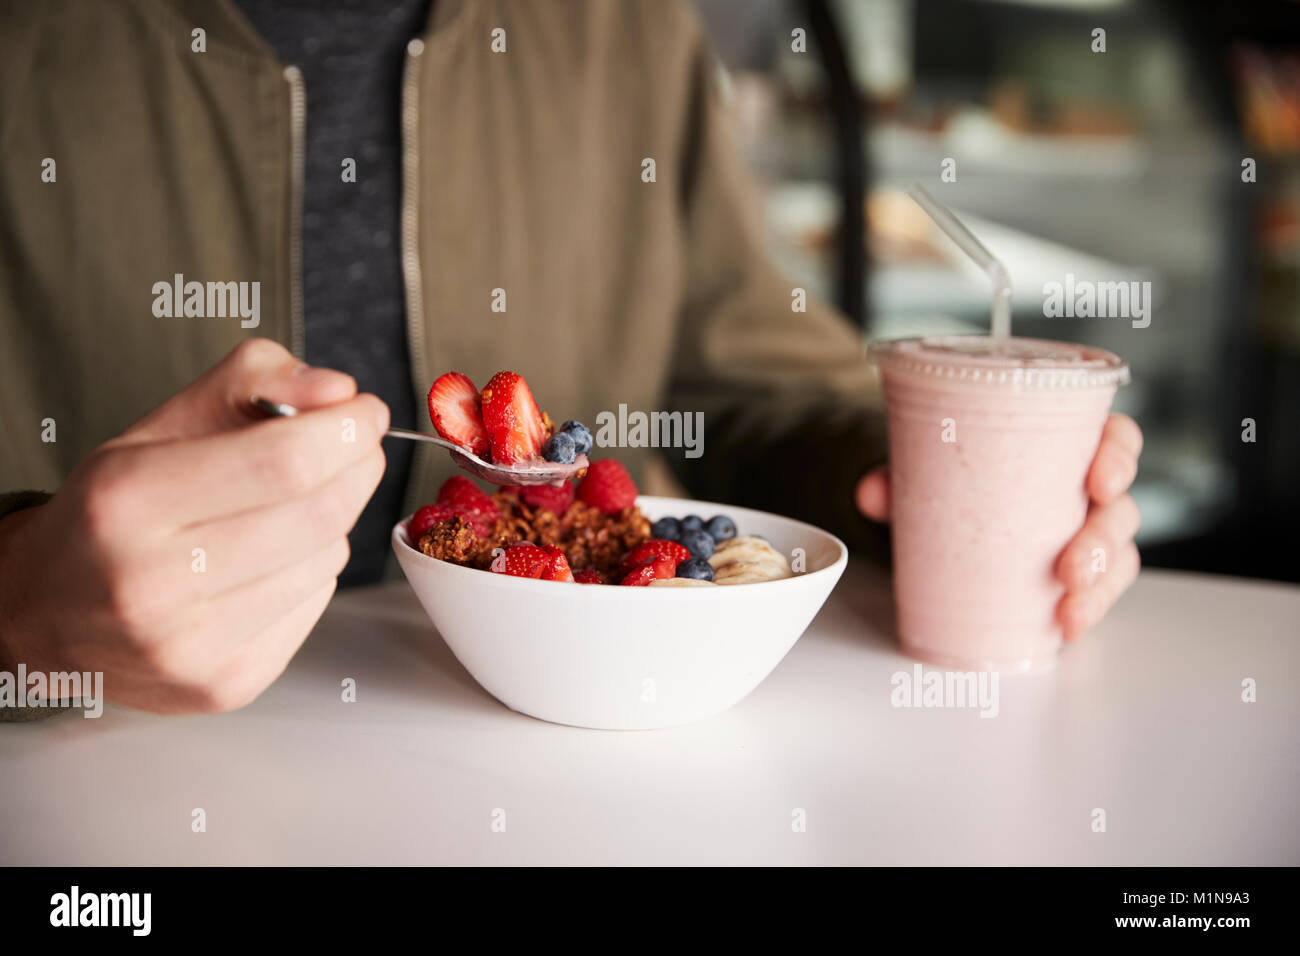 Close Up Of Man Eating Healthy Breakfast Of Granola In Cafe Stock Photo